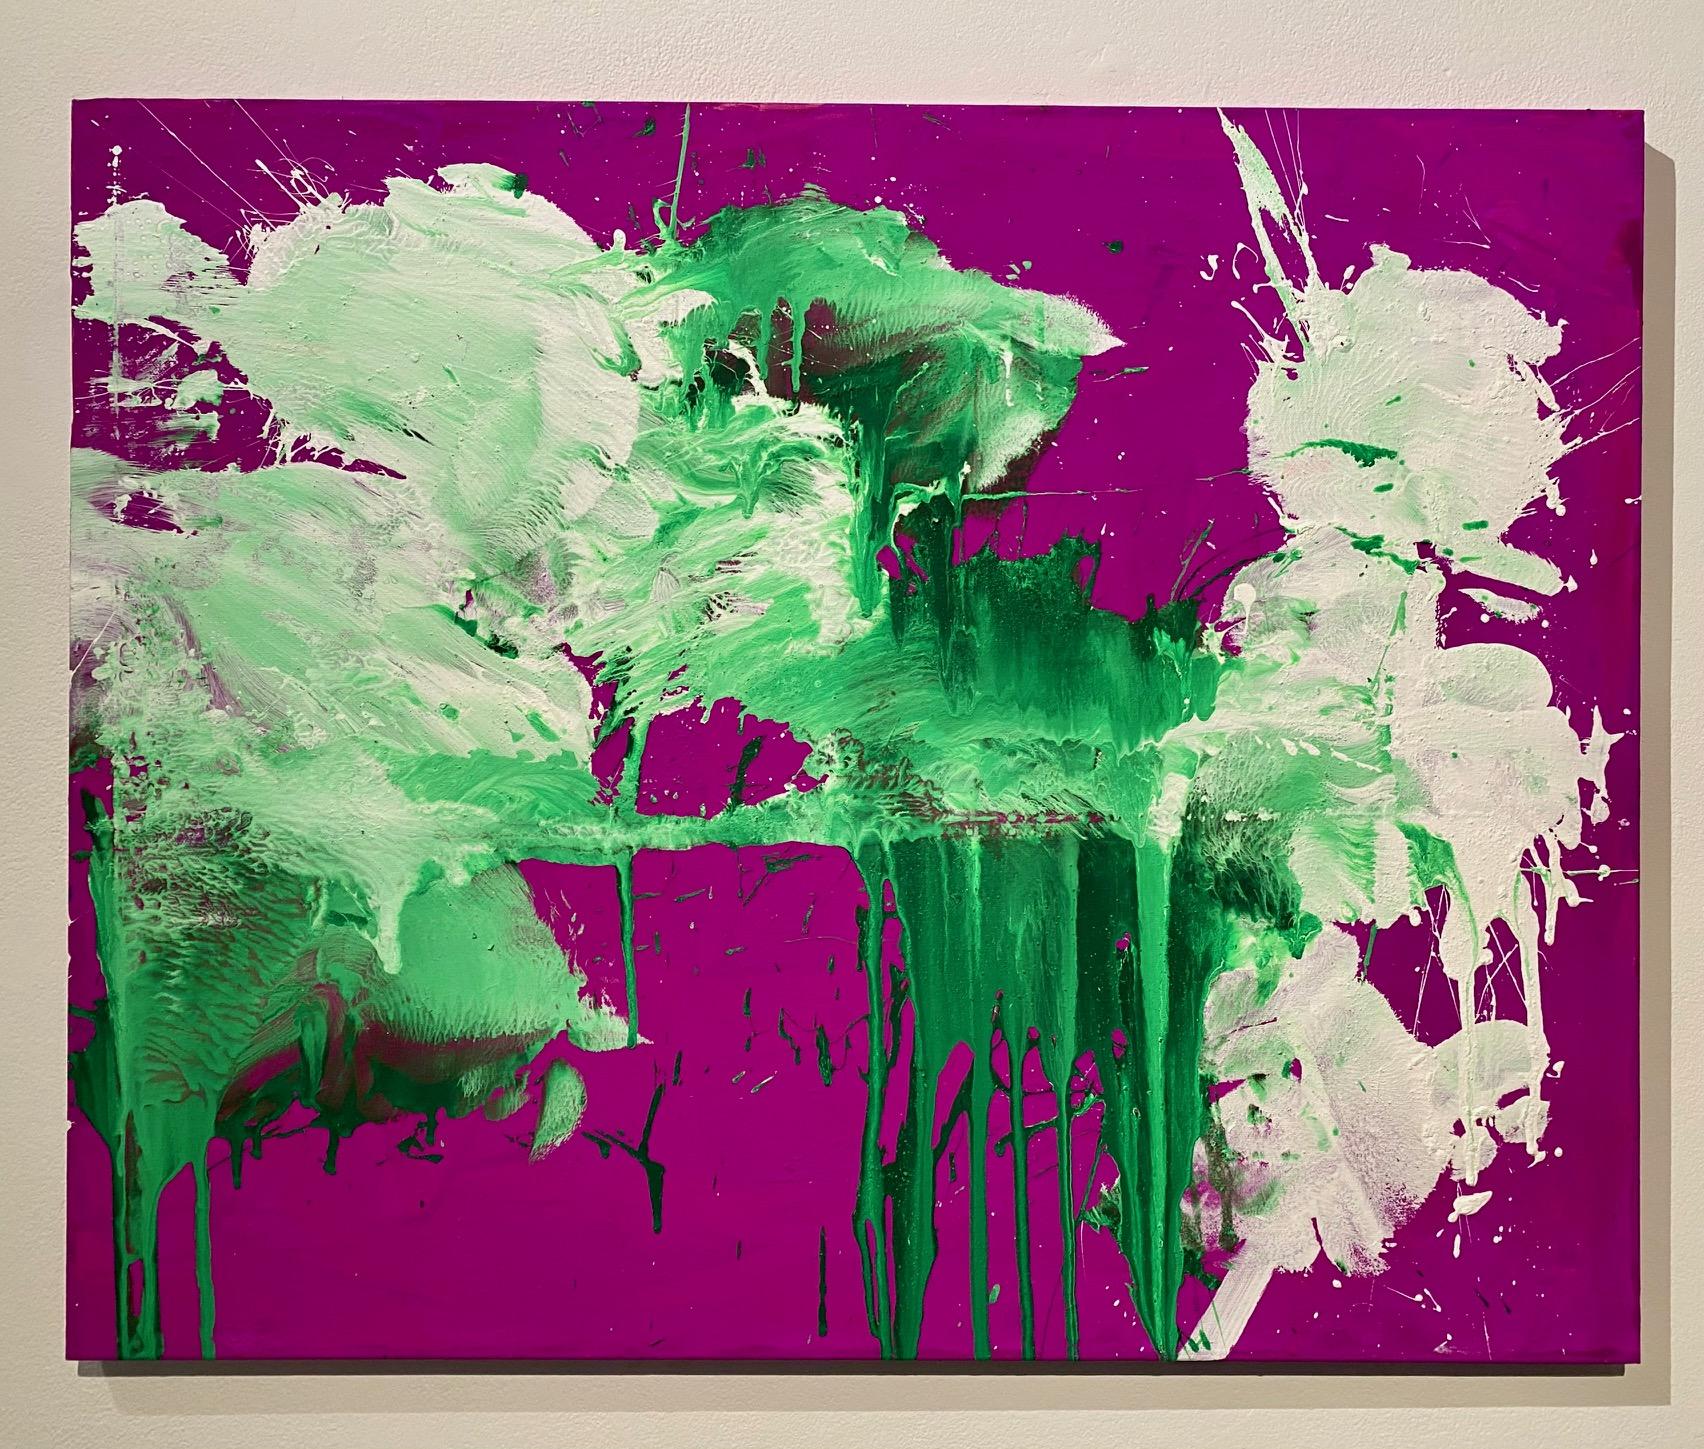 Ushio Shinohara Abstract Painting - "White and Green on Violet  (A), " Acrylic on Canvas - Abstract Boxing painting